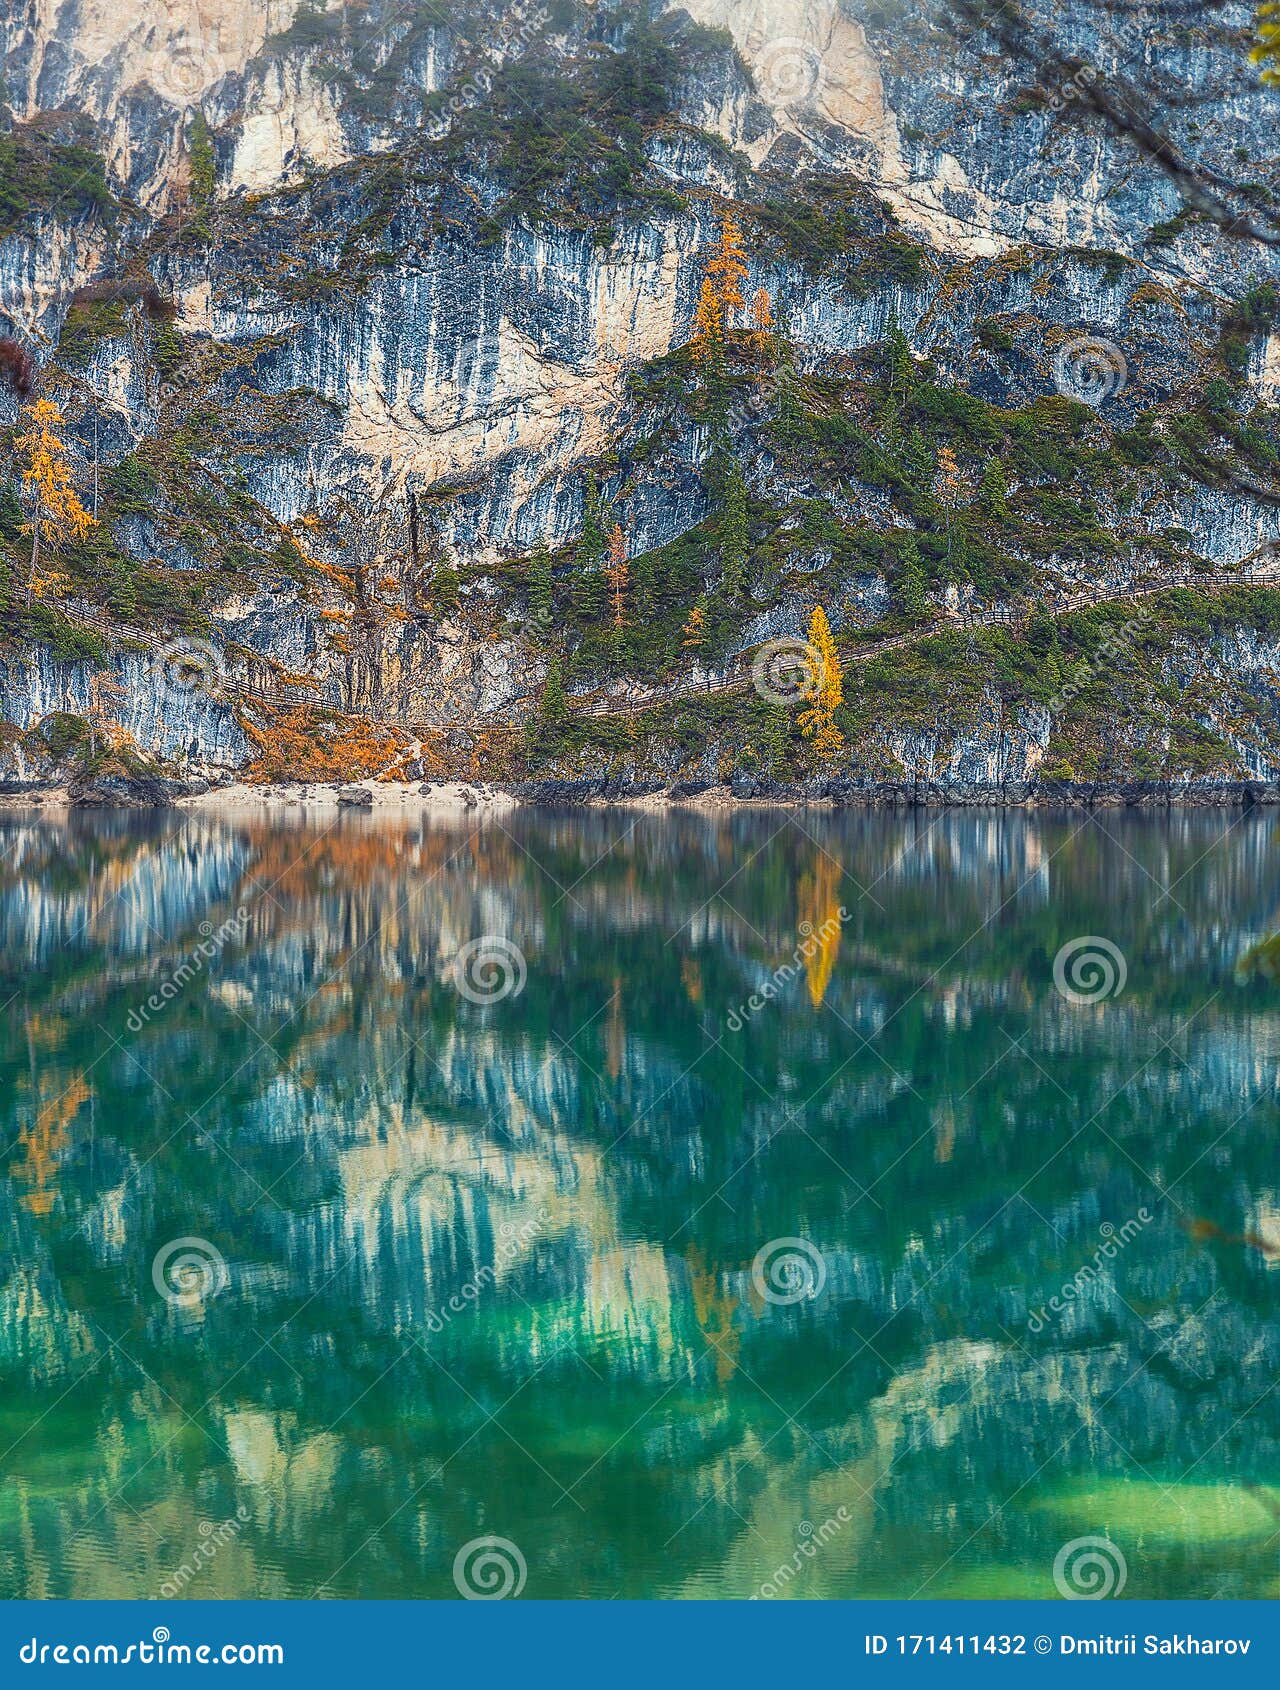 amazing emerald waters of lago di braies in italy with beautiful reflection